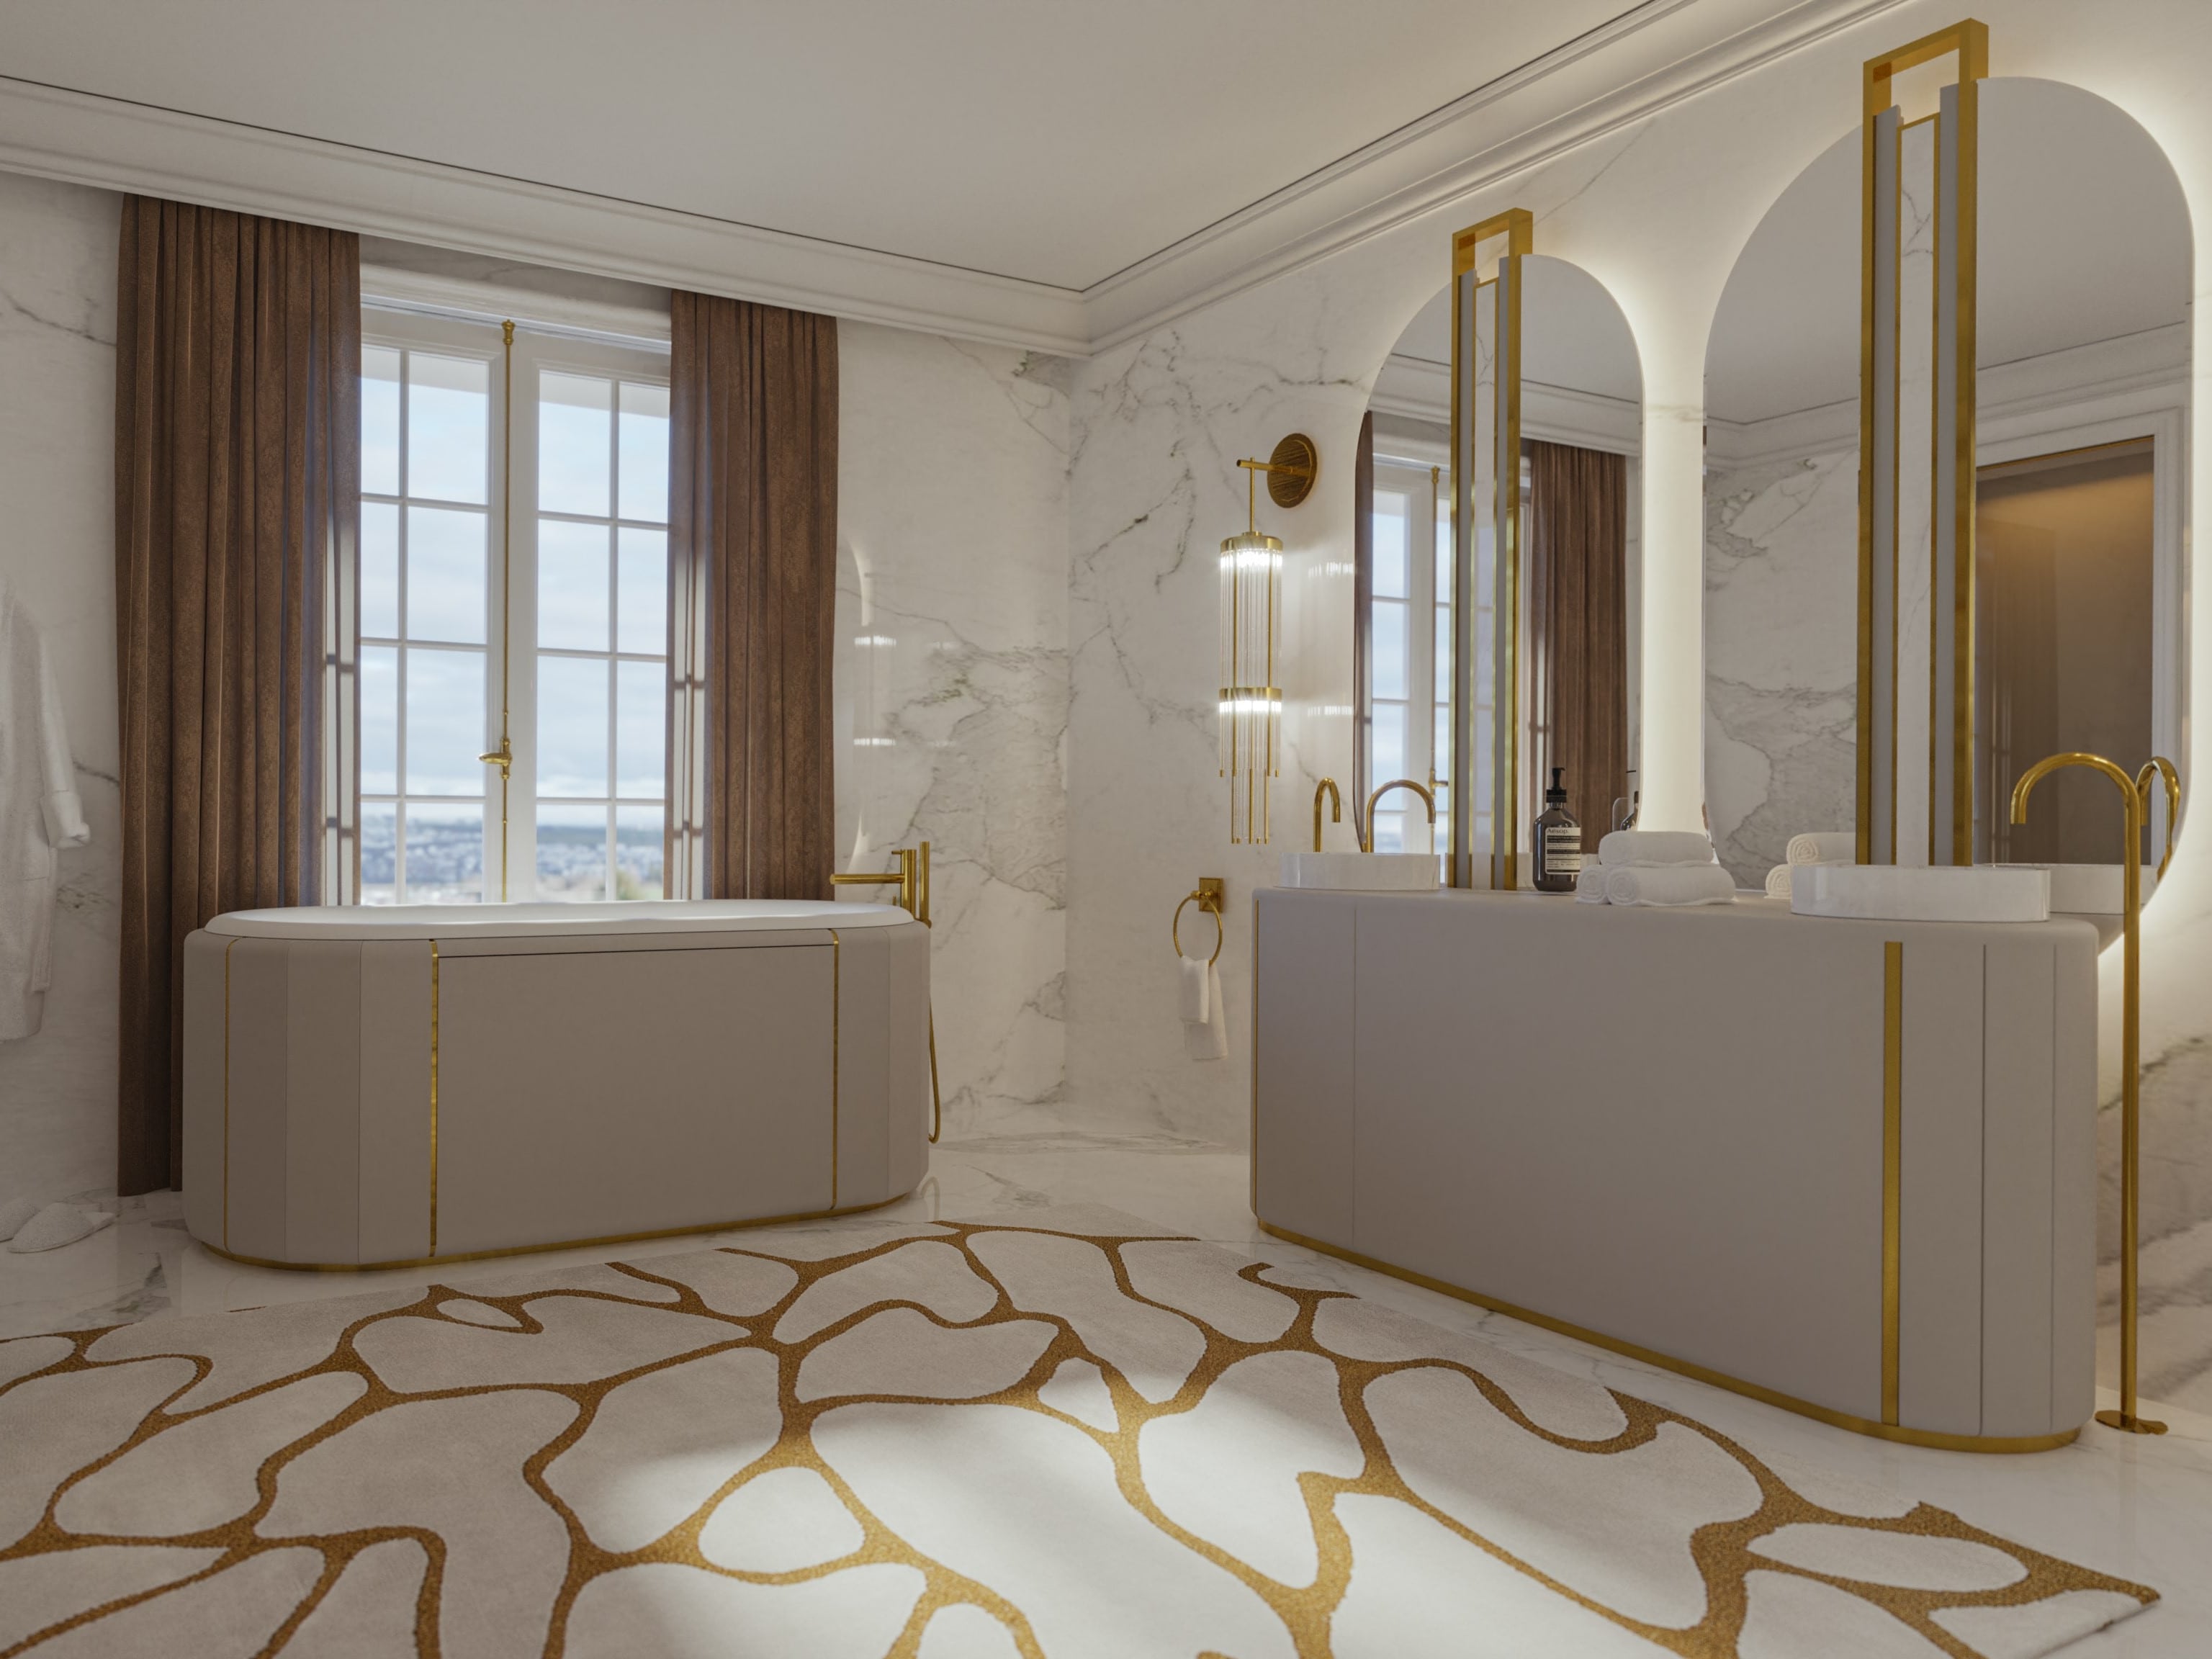 White Bathroom With Mixture Of Textures And Golden Details - Home'Society